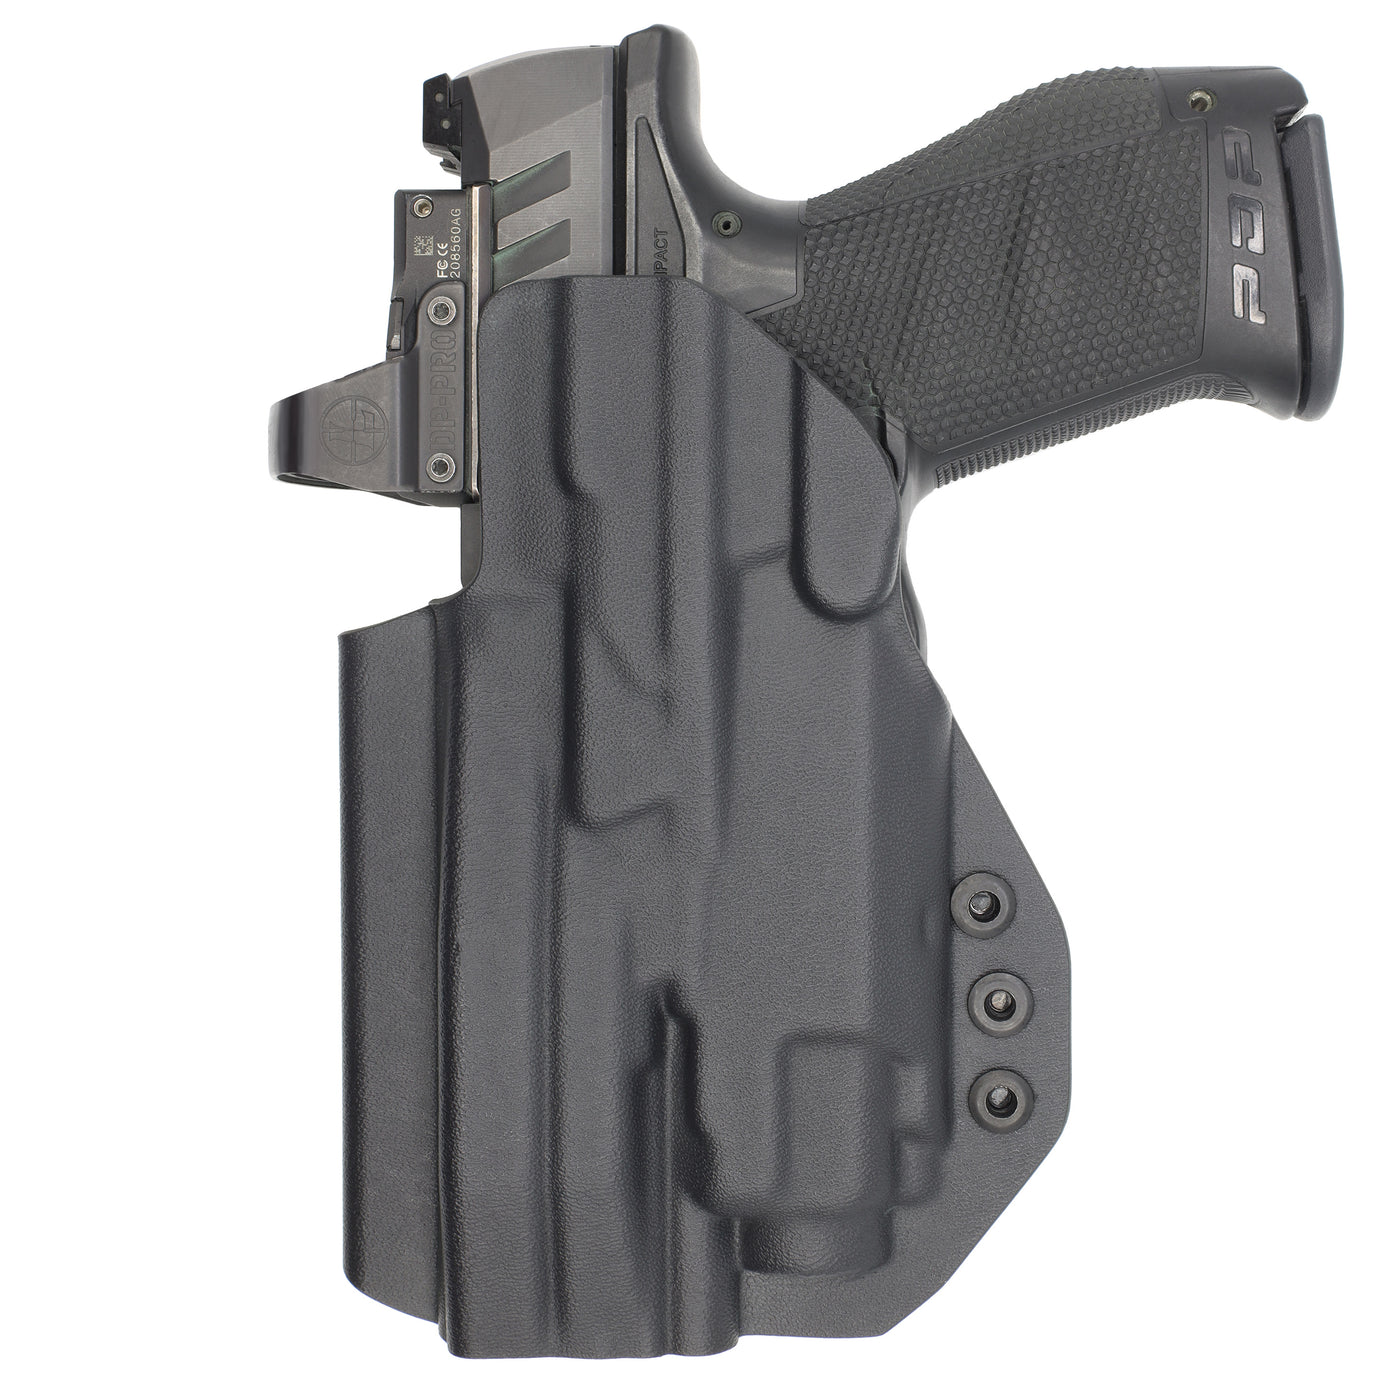 C&G Holsters quickship IWB Tactical Beretta streamlight TLR8 holstered back view